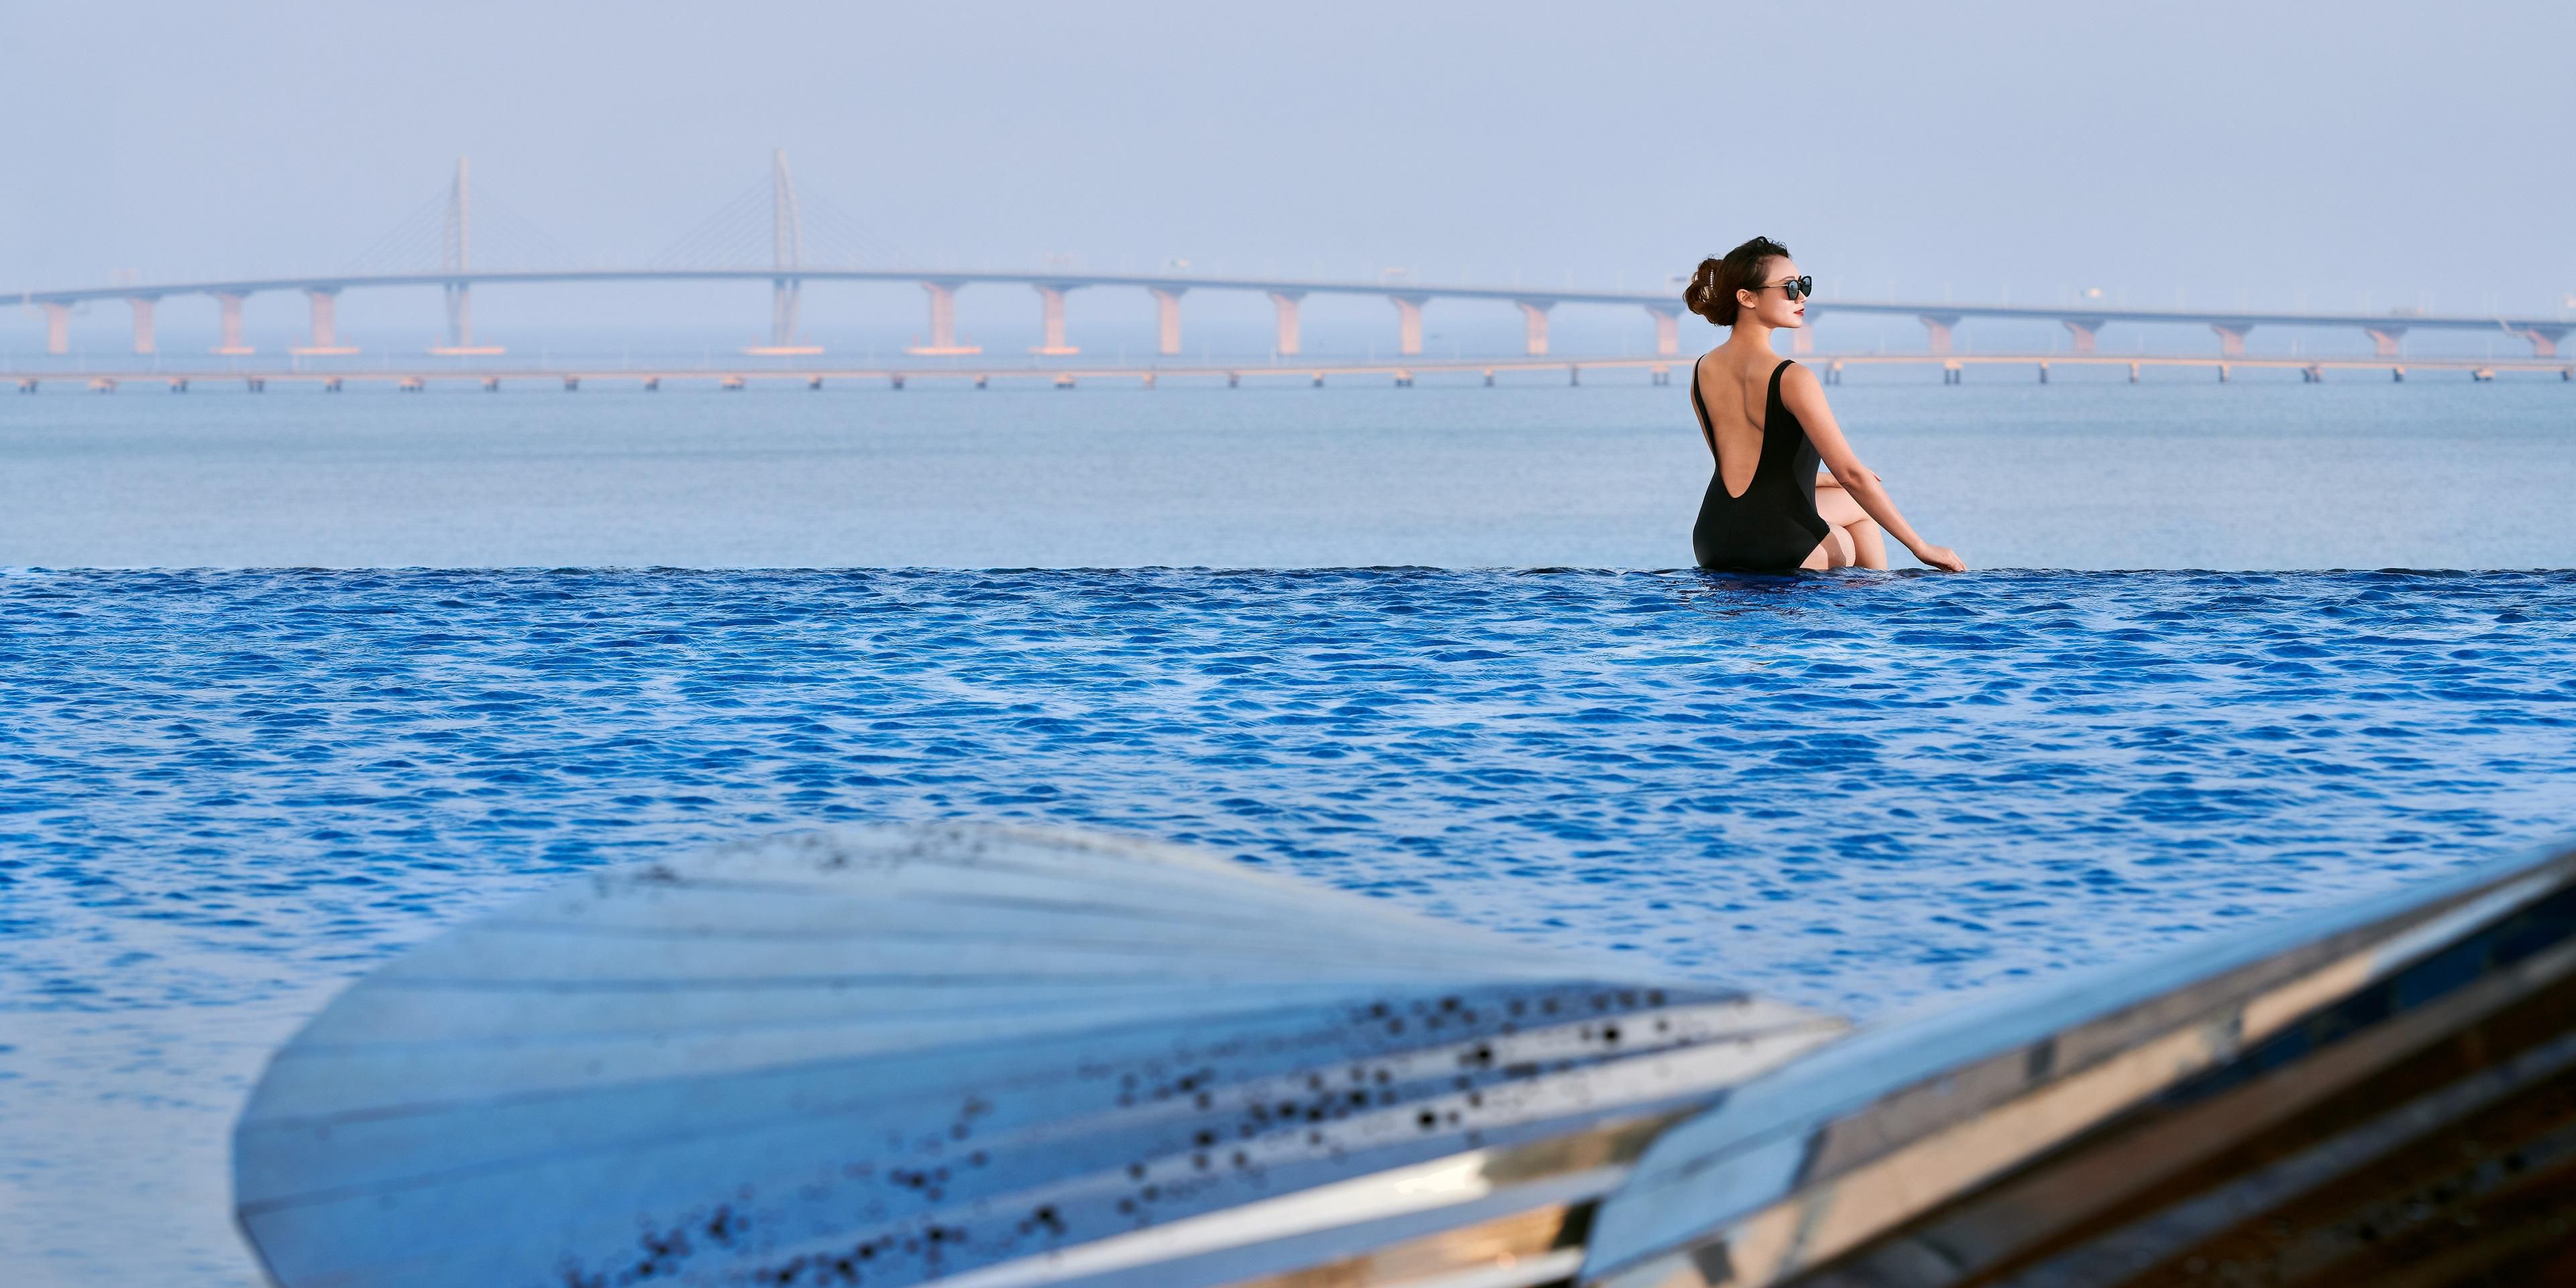 The hotel has an outdoor infinity pool with wonderful sea views that take in Zhuhai, Macau and Hong Kong and the Hongkong-Zhuhai-Macau Bridge.